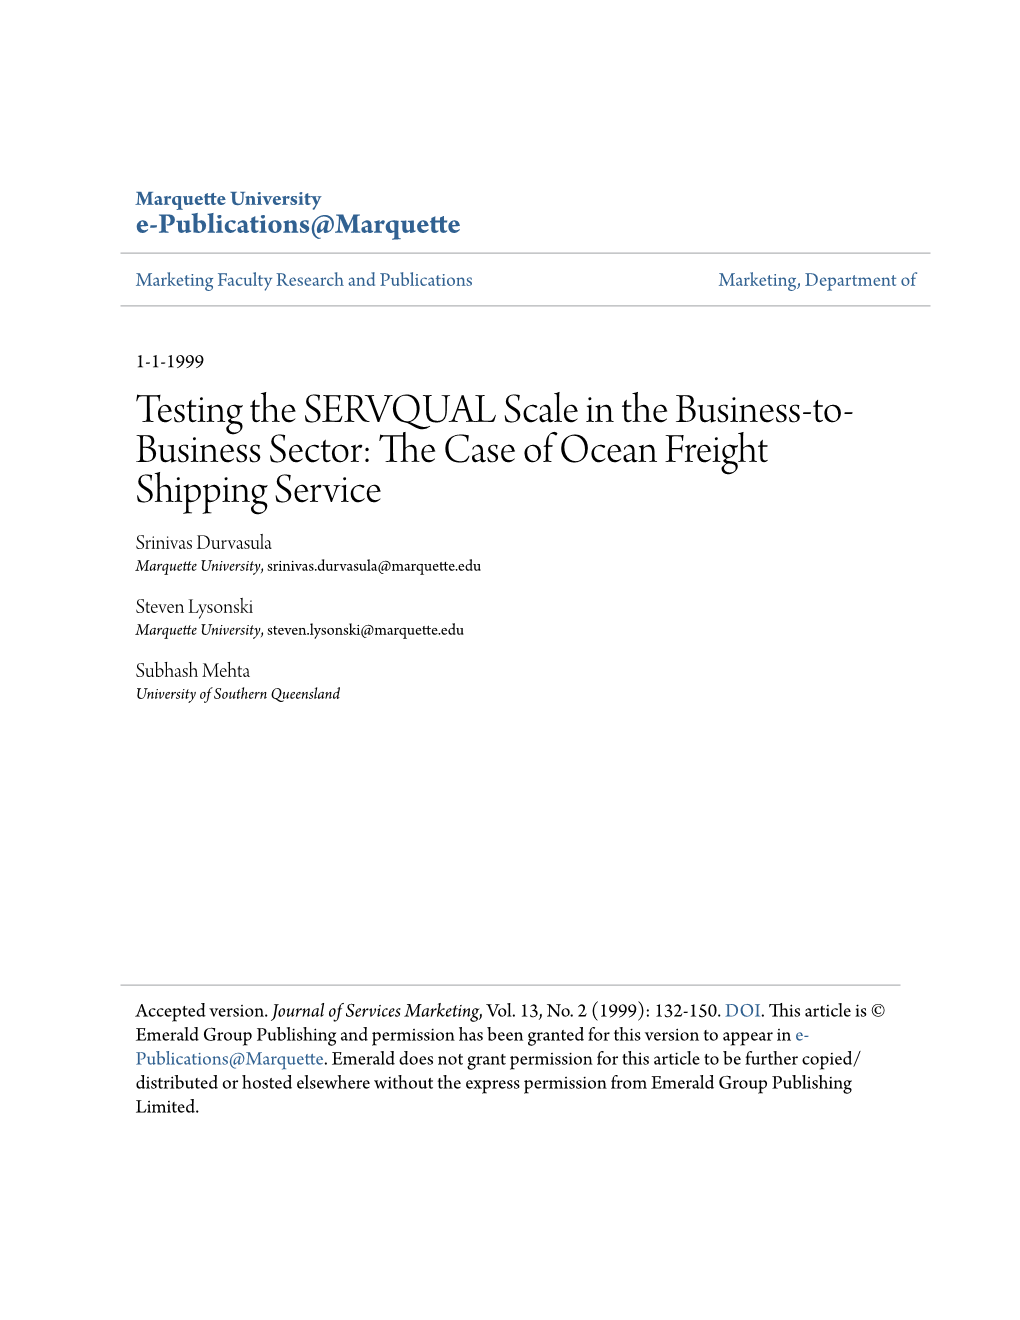 Testing the SERVQUAL Scale in the Business-To-Business Sector: the Case of Ocean Freight Shipping Service